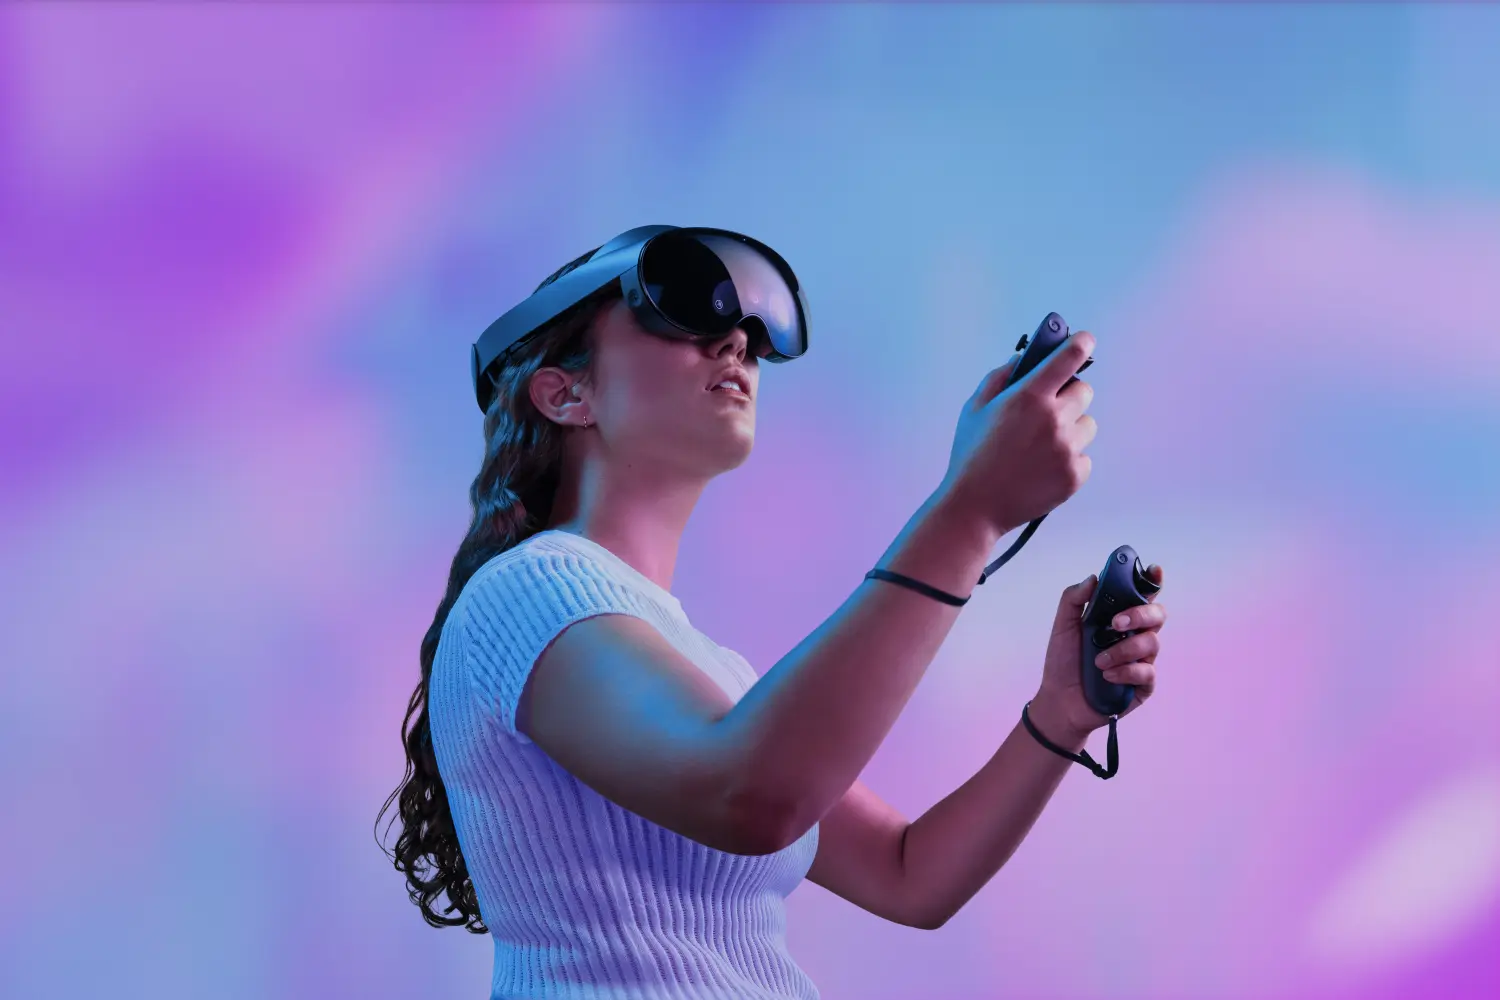 New Industry, New Rules: Building The Metaverse Without Bias